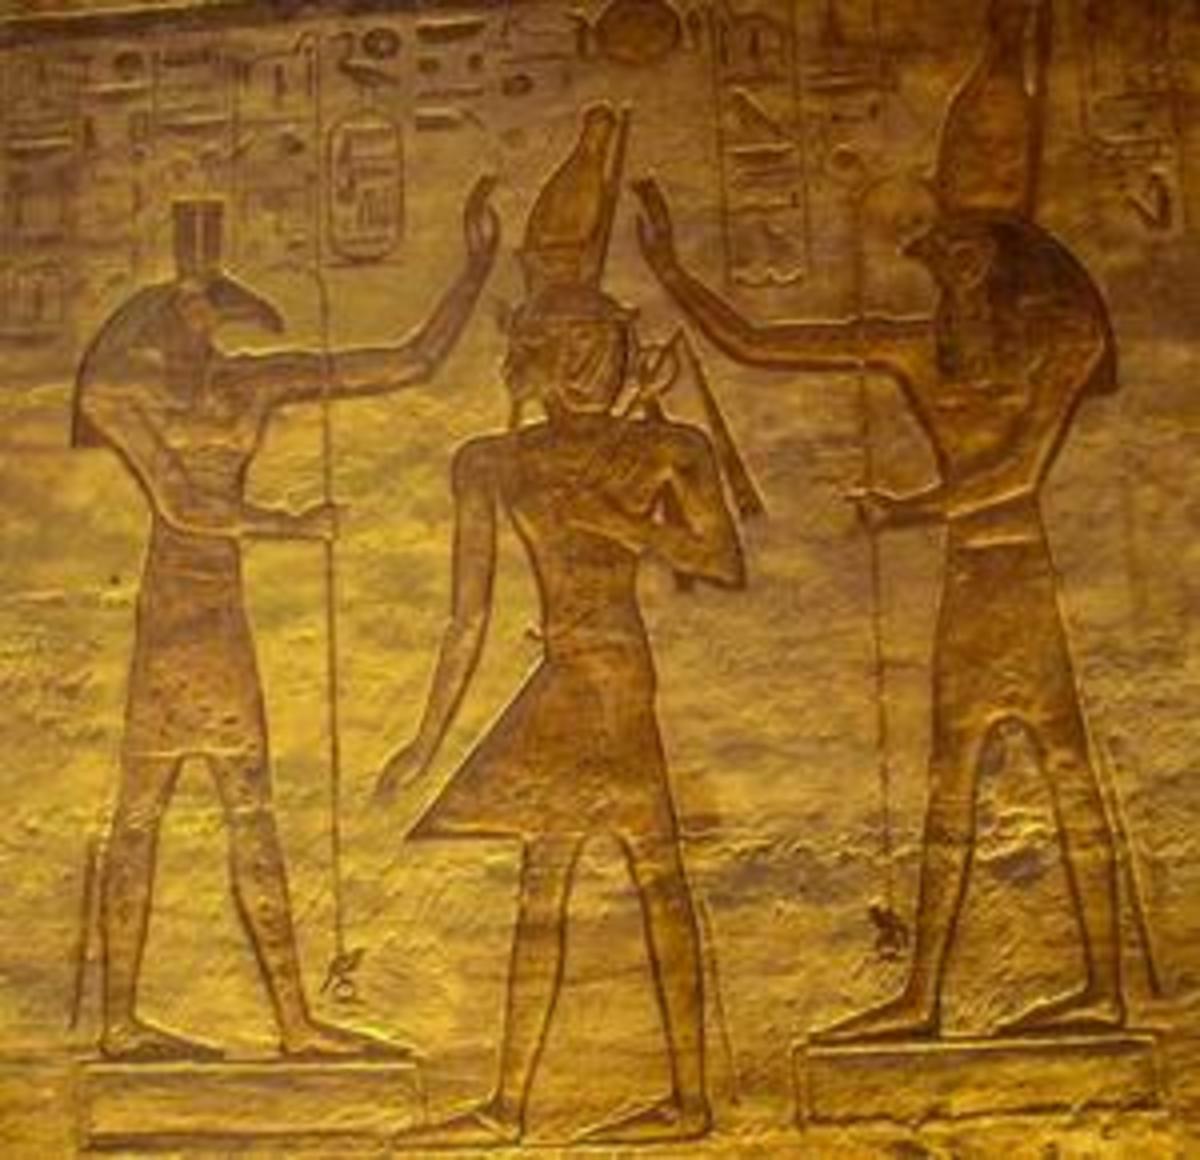 This is a common sight in tombs. Pharaohs wanted to show they were balanced, like Maat. So they depicted themselves (centre) with Seth (left) and Horus (right)